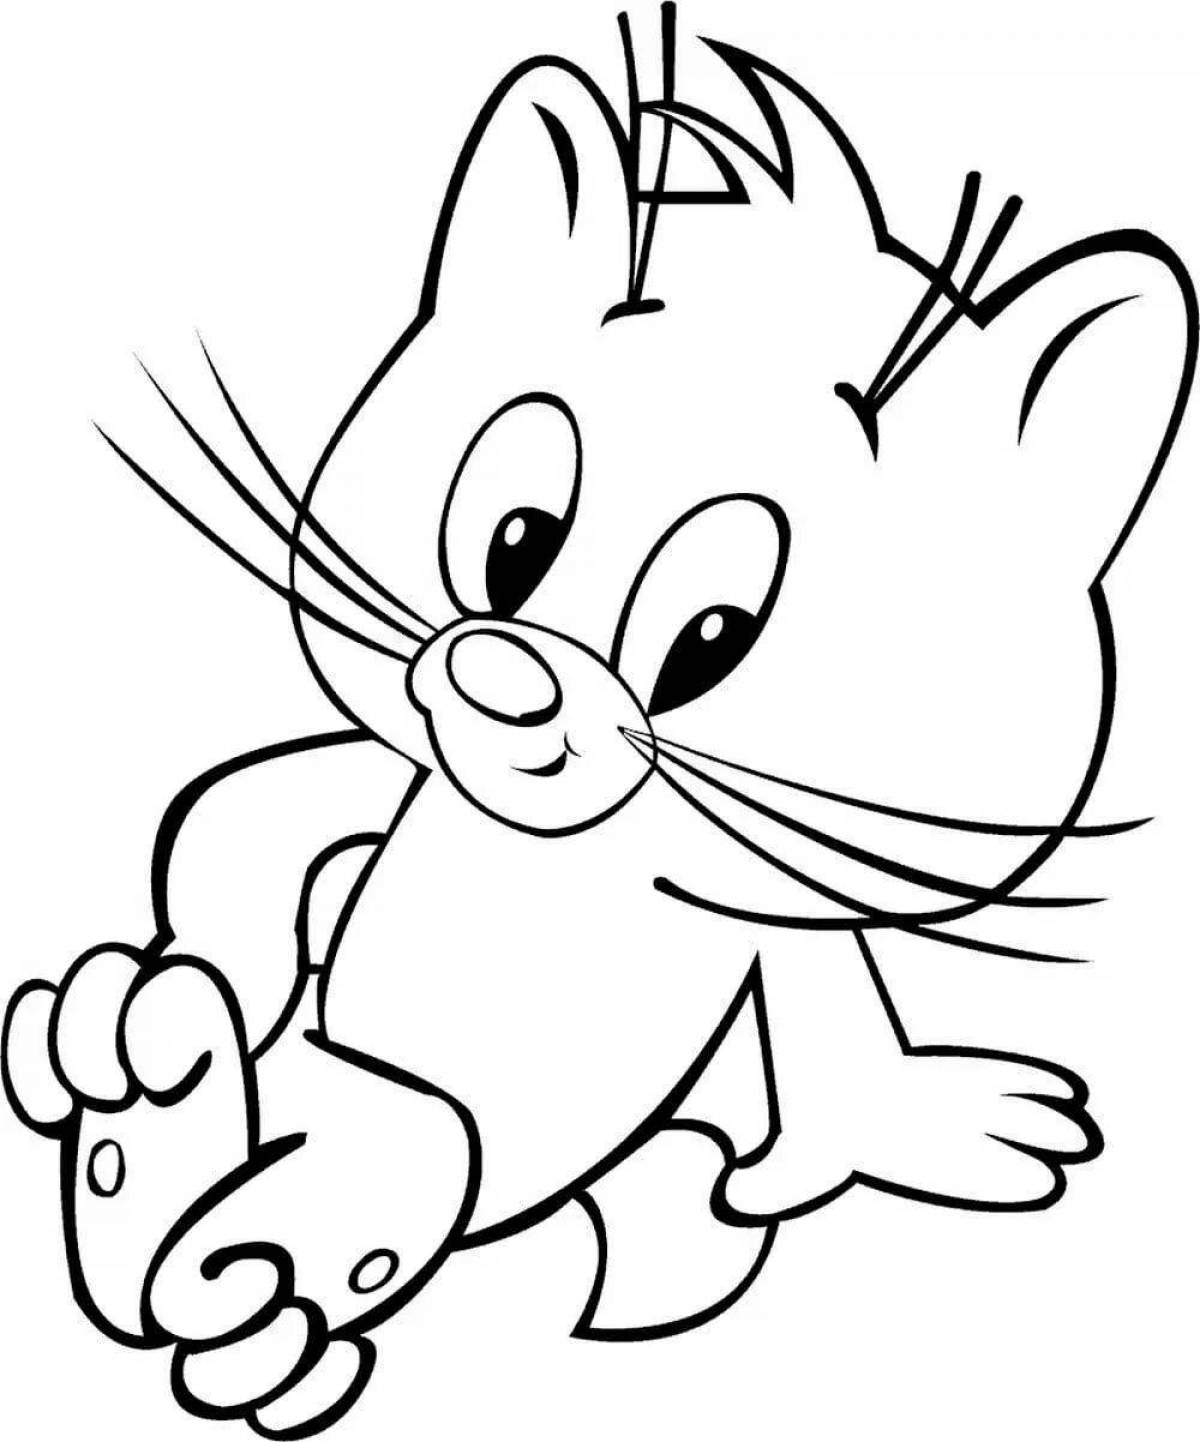 Draw coloring page